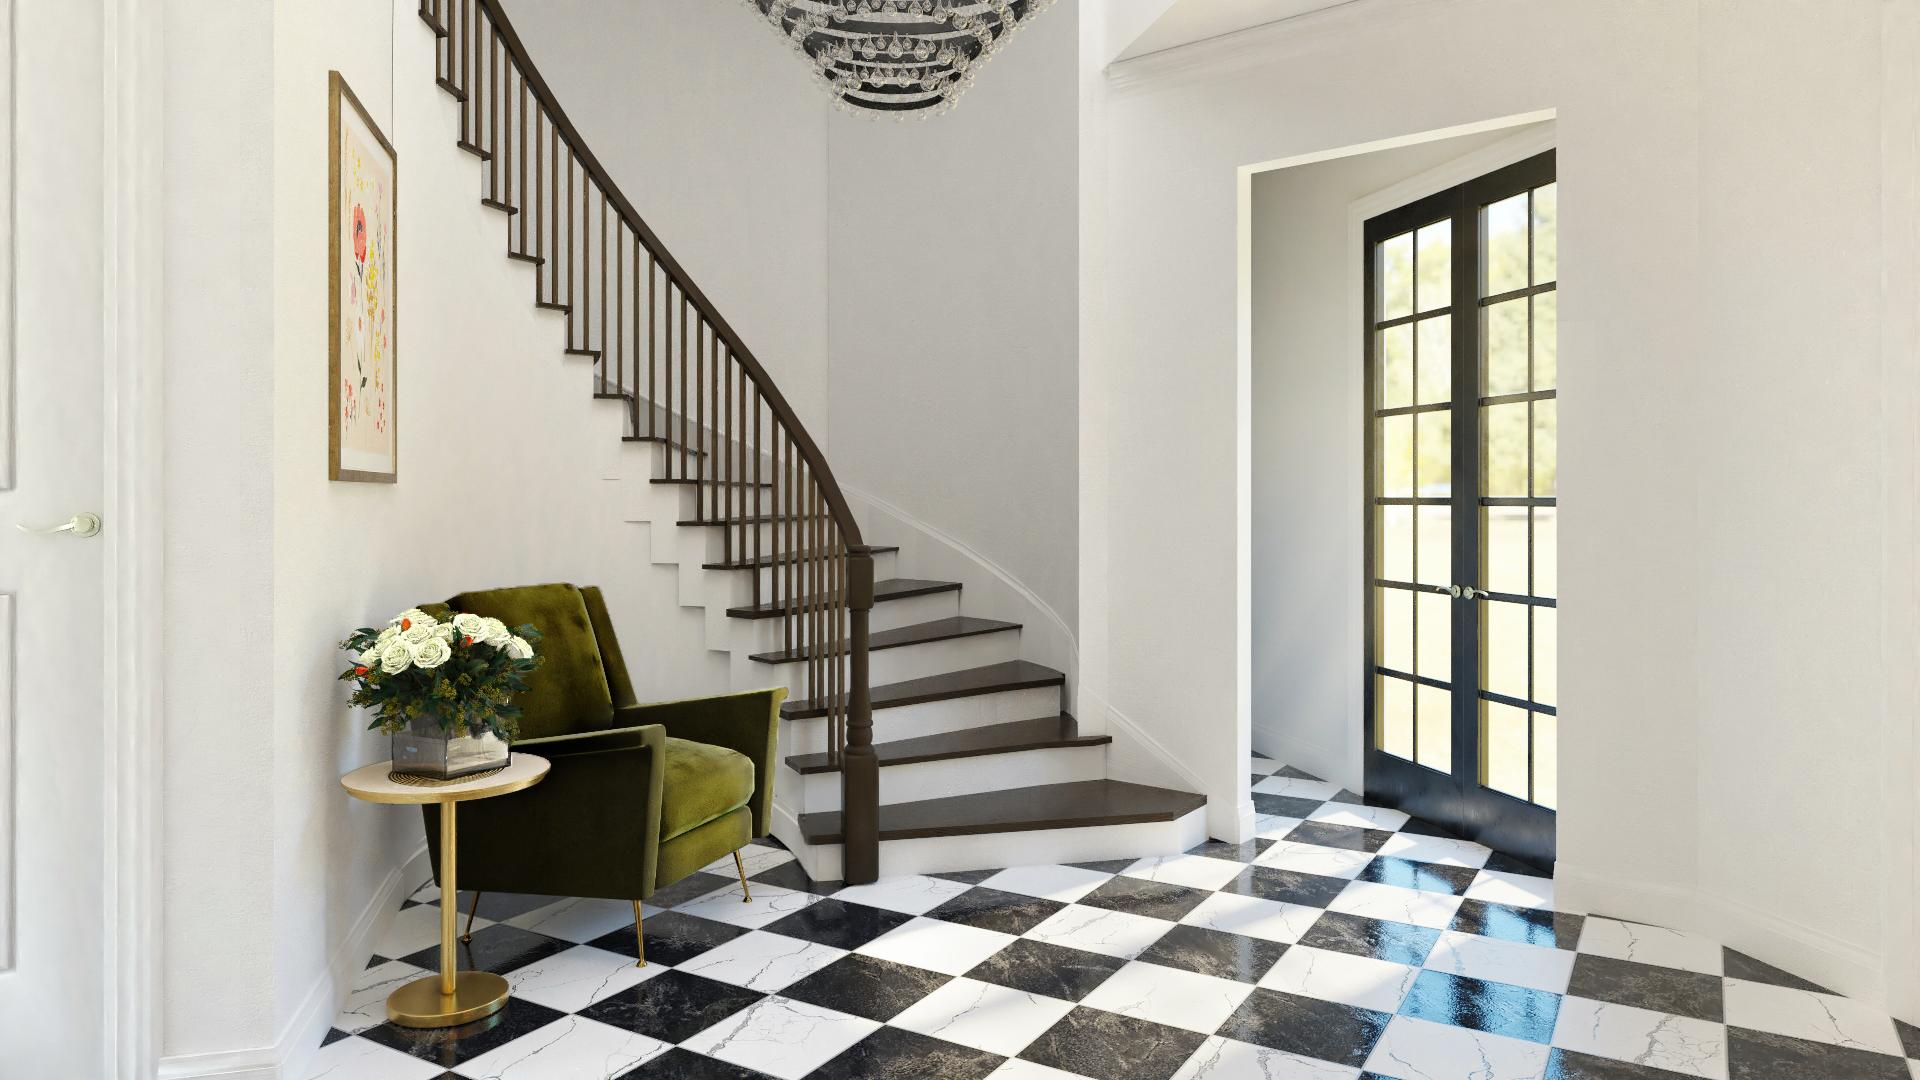 Chess Floors Makes This Eclectic Entryway Inviting 